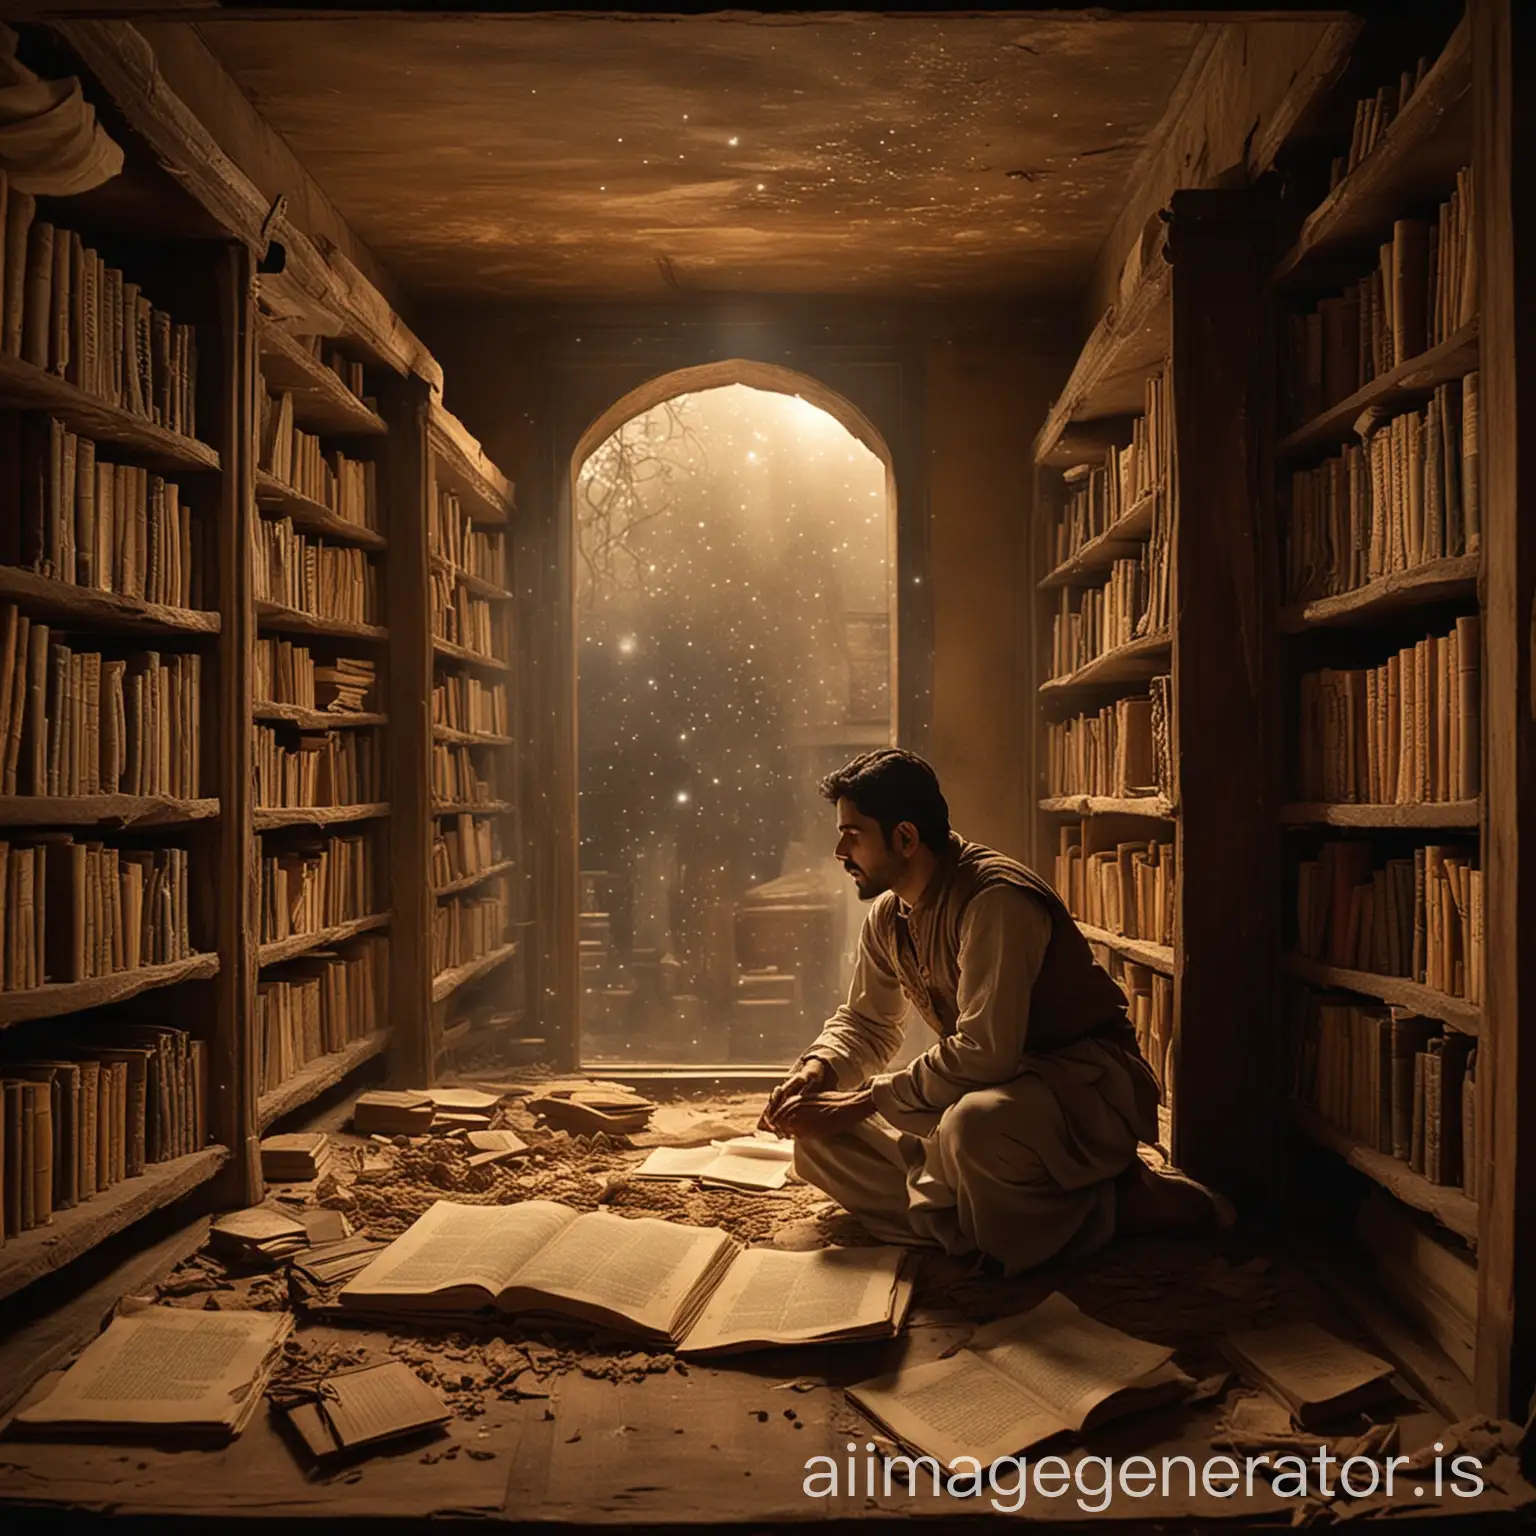 Ethereal-Light-Illuminating-Ancient-Tomes-Aamir-Discovers-a-Forgotten-Manuscript